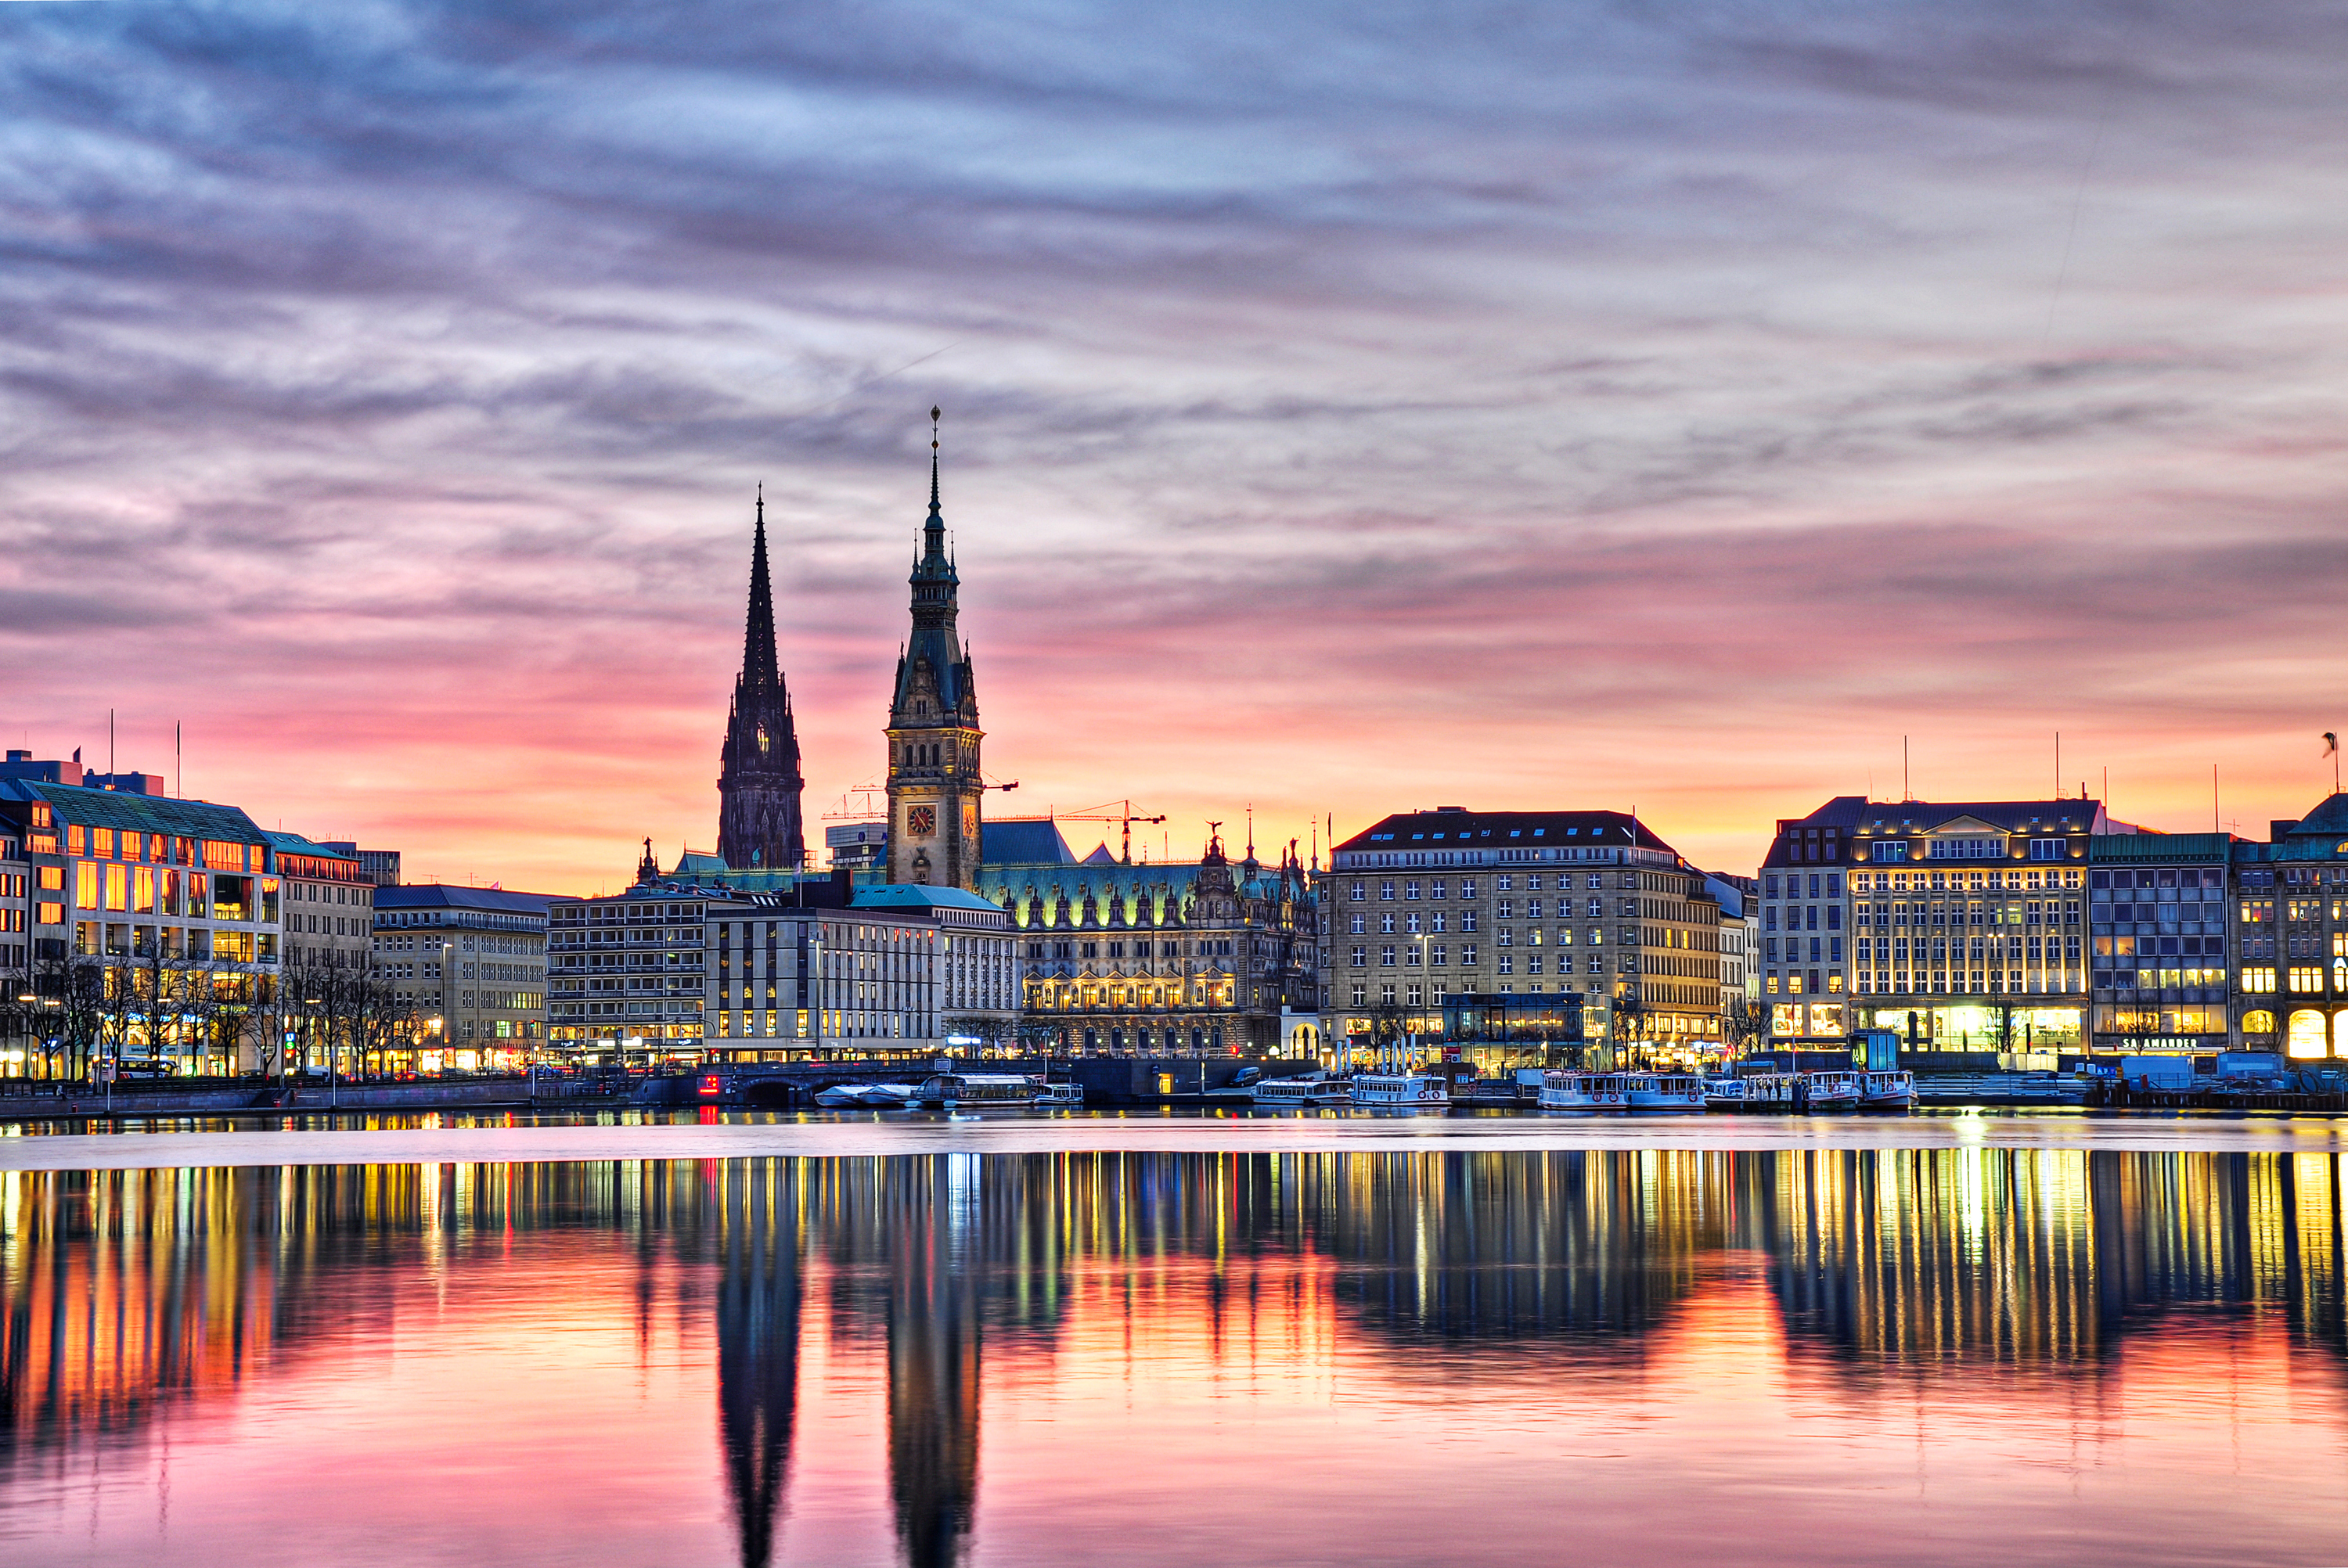 hamburg, evening, man made, building, germany, reflection, river, sunset, cities Phone Background